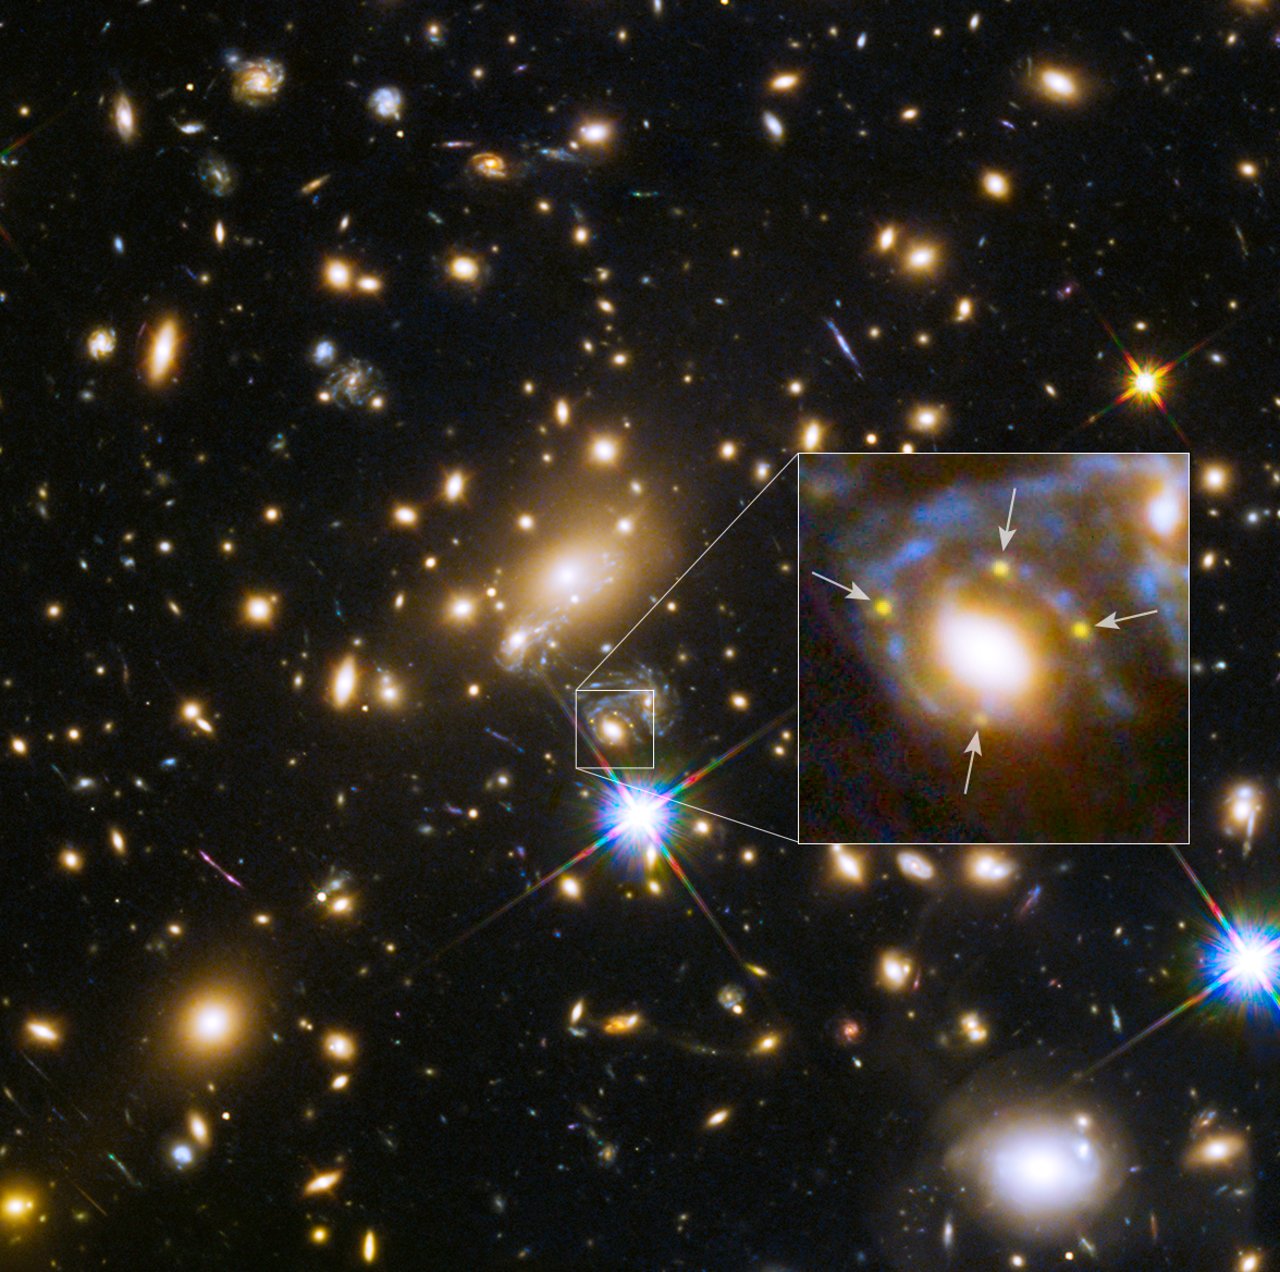 This image shows the huge galaxy cluster MACS J1149+2223, whose light took over 5 billion years to reach us.